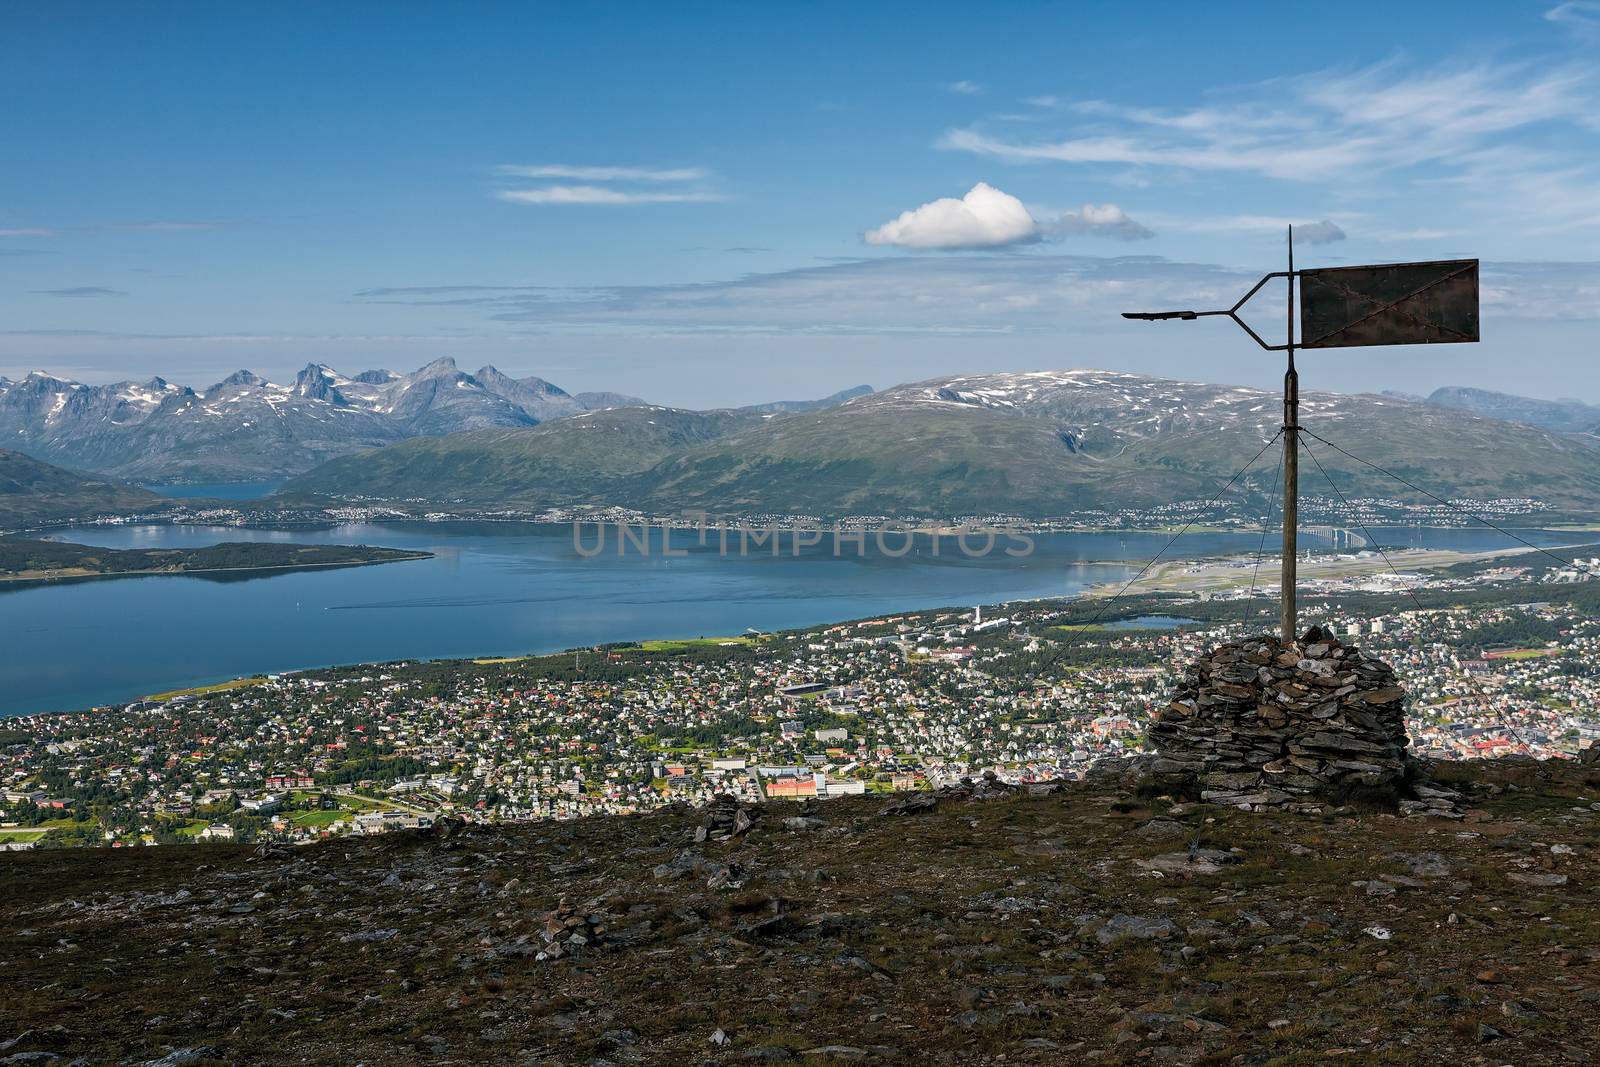 View of Tromso and mountains seen from the top of a mountain, Norway